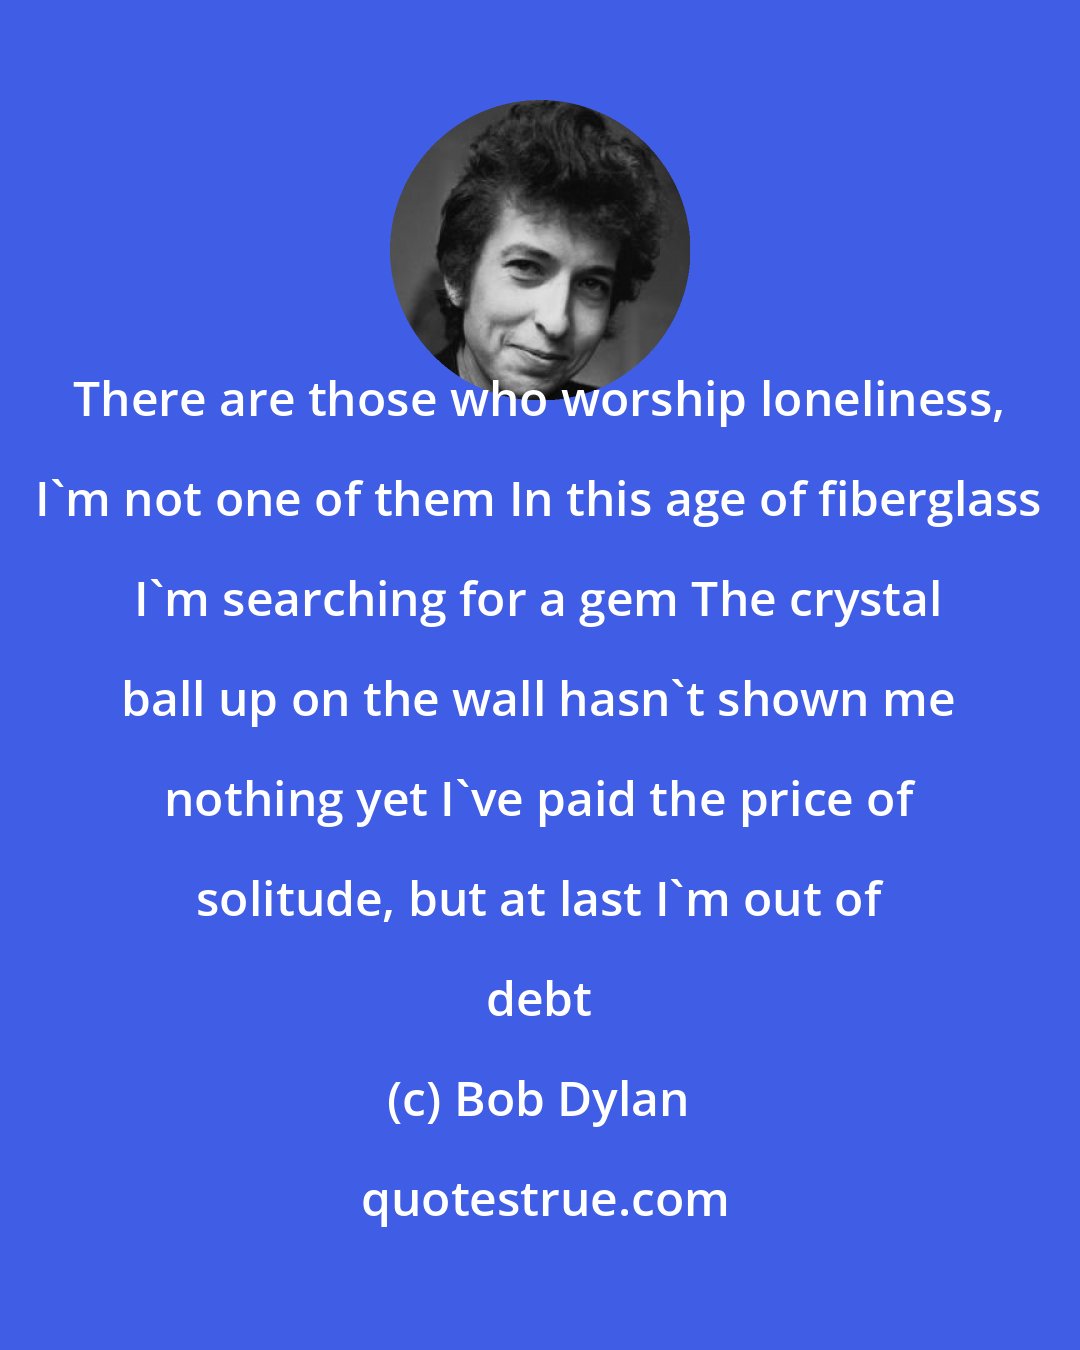 Bob Dylan: There are those who worship loneliness, I'm not one of them In this age of fiberglass I'm searching for a gem The crystal ball up on the wall hasn't shown me nothing yet I've paid the price of solitude, but at last I'm out of debt